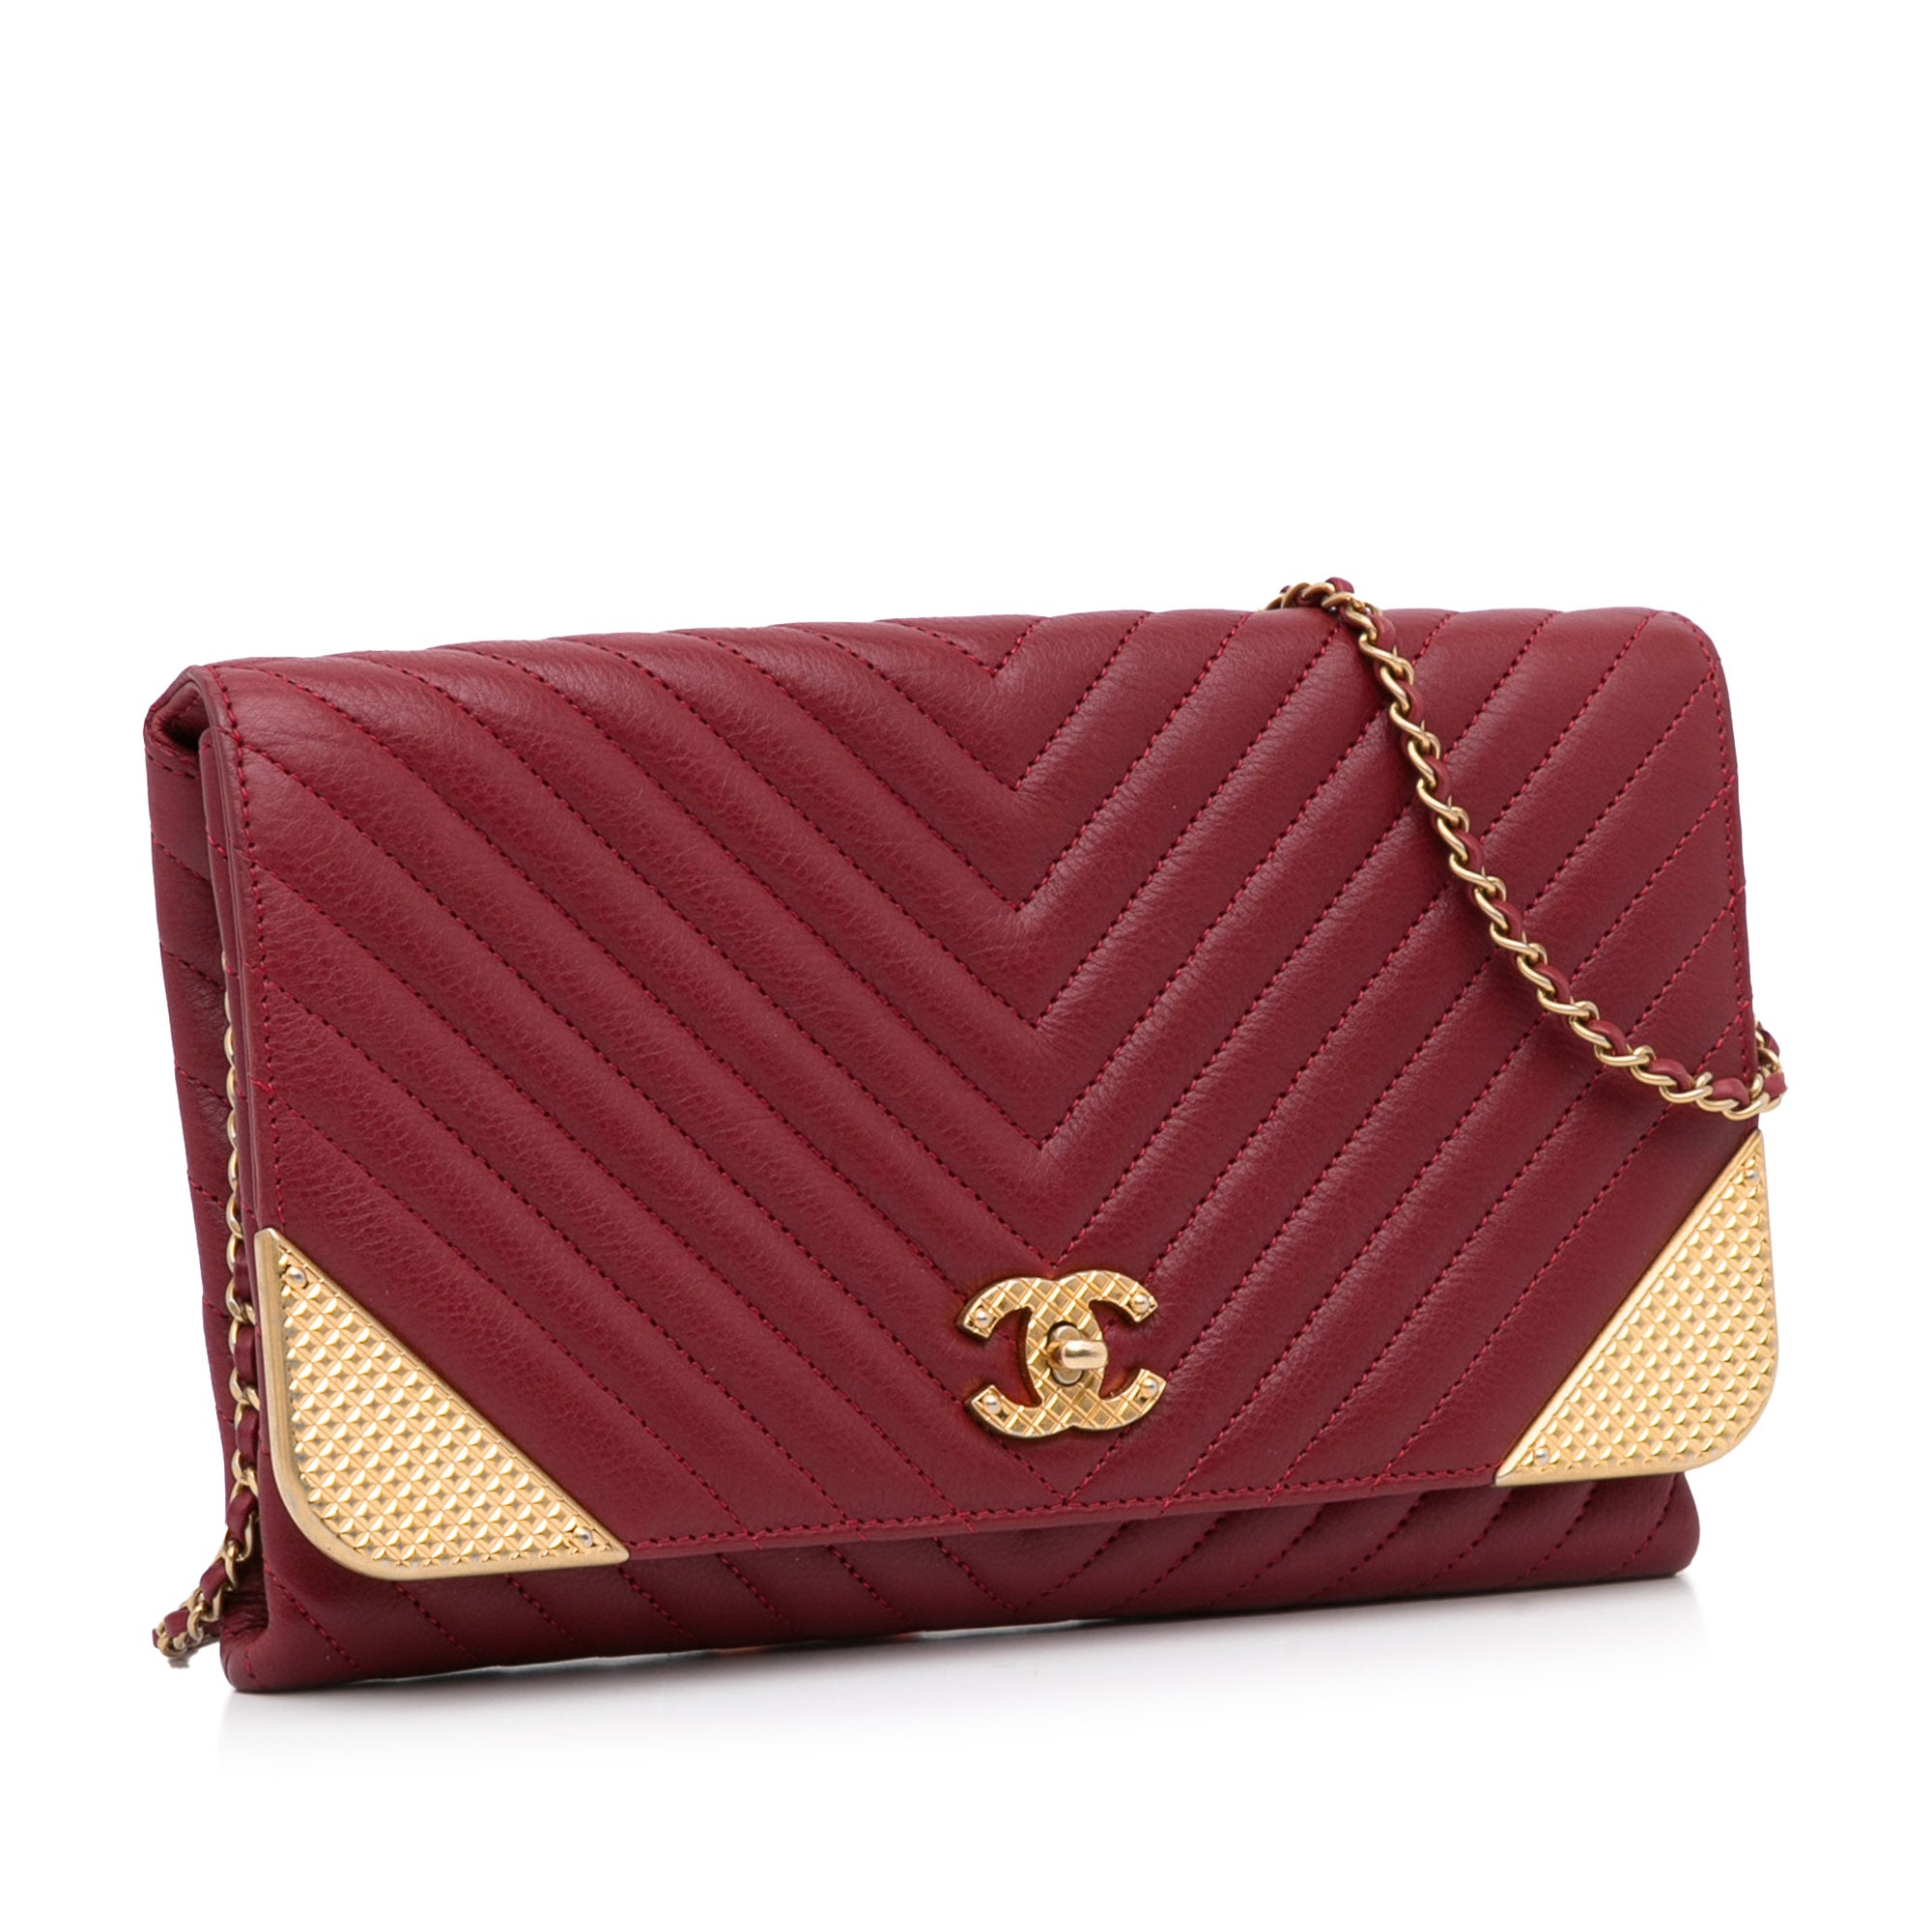 Only 1198.00 usd for CHANEL Top Handle Flap Card Holder Quilted